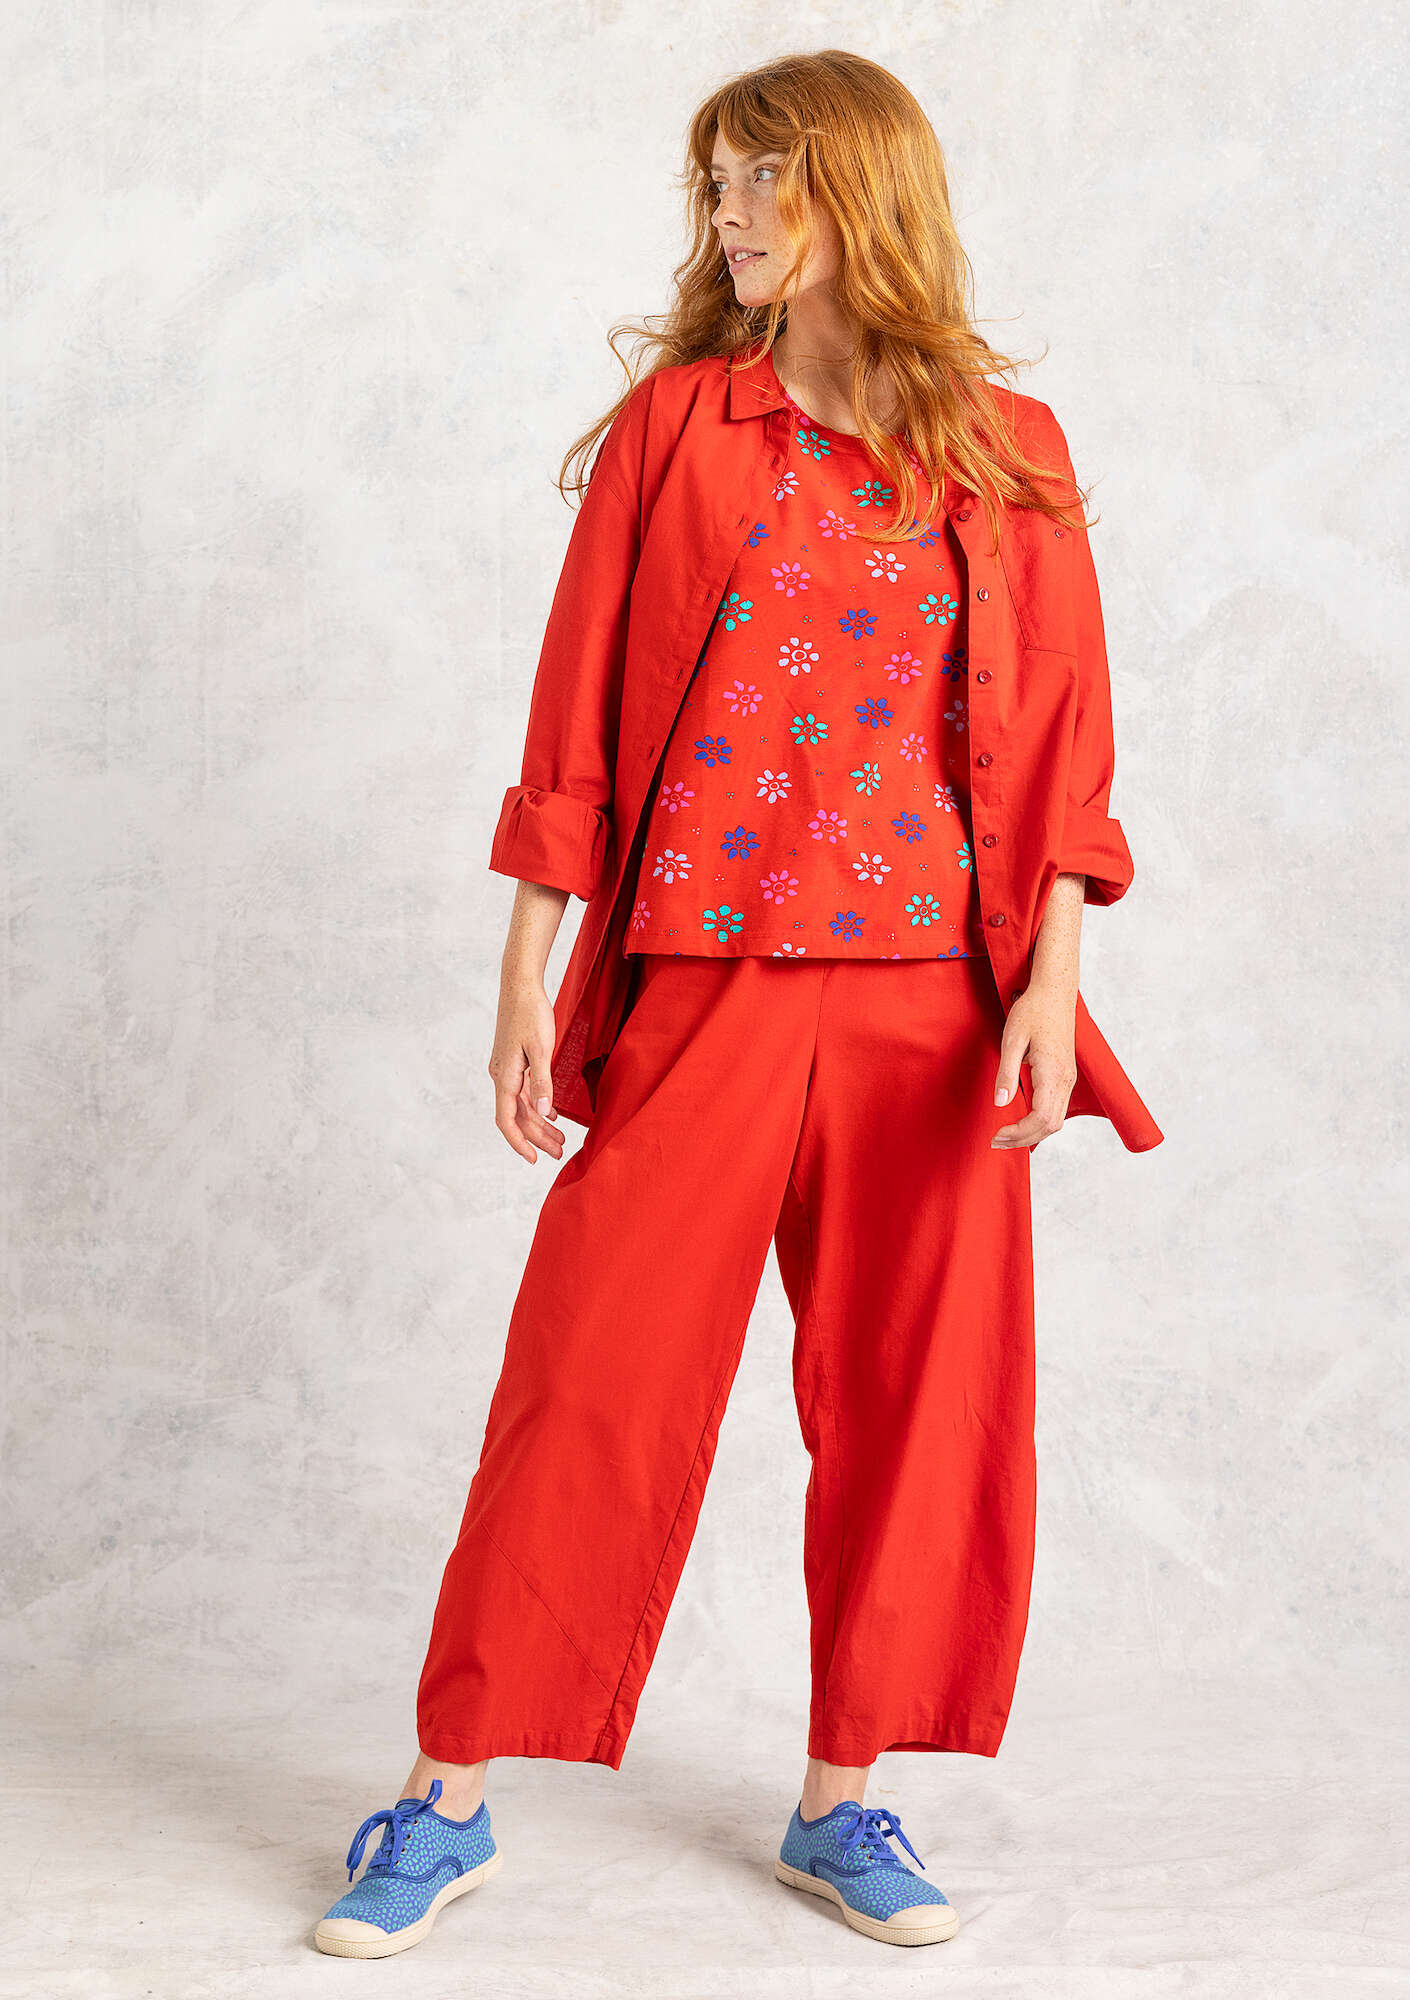 Woven organic cotton trousers parrot red